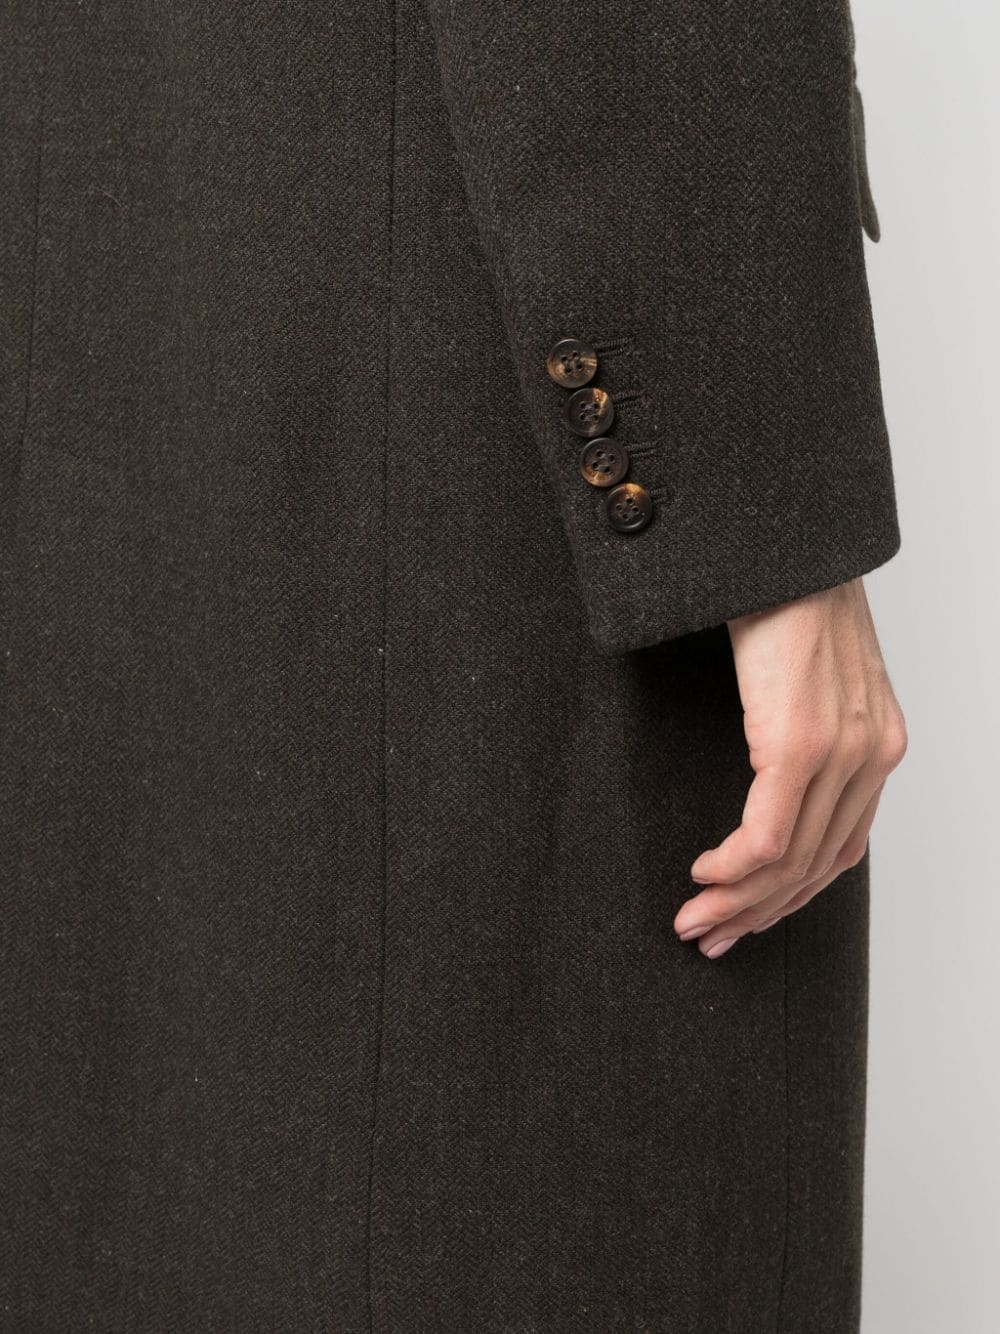 Women’s one-and-a-half-breasted coat in bark-colored wool